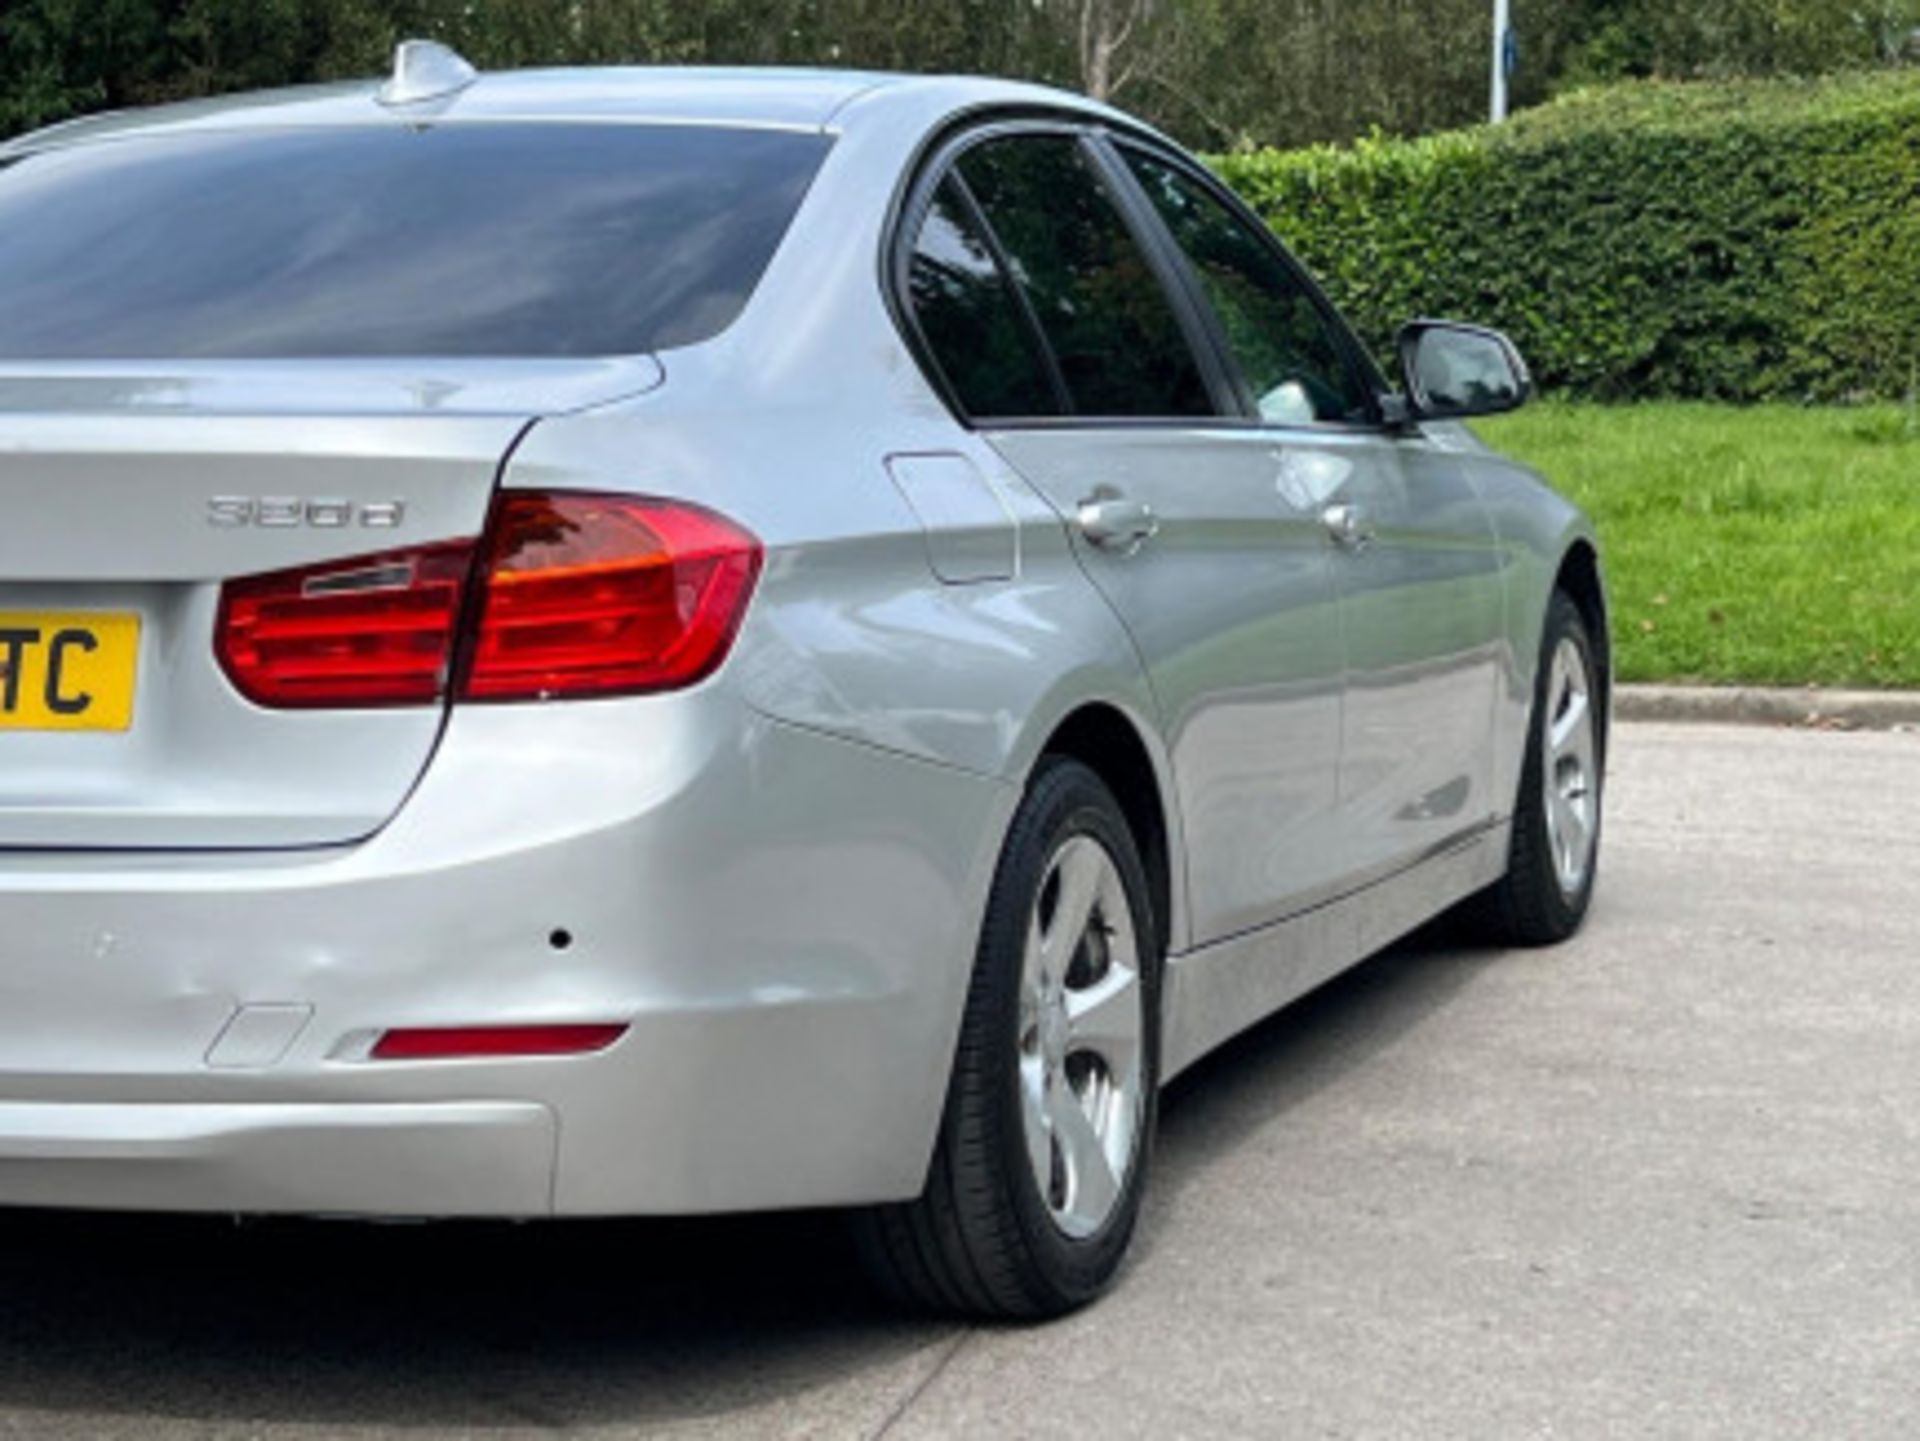 BMW 3 SERIES 2.0 DIESEL ED START STOP - A WELL-MAINTAINED GEM >>--NO VAT ON HAMMER--<< - Image 106 of 229